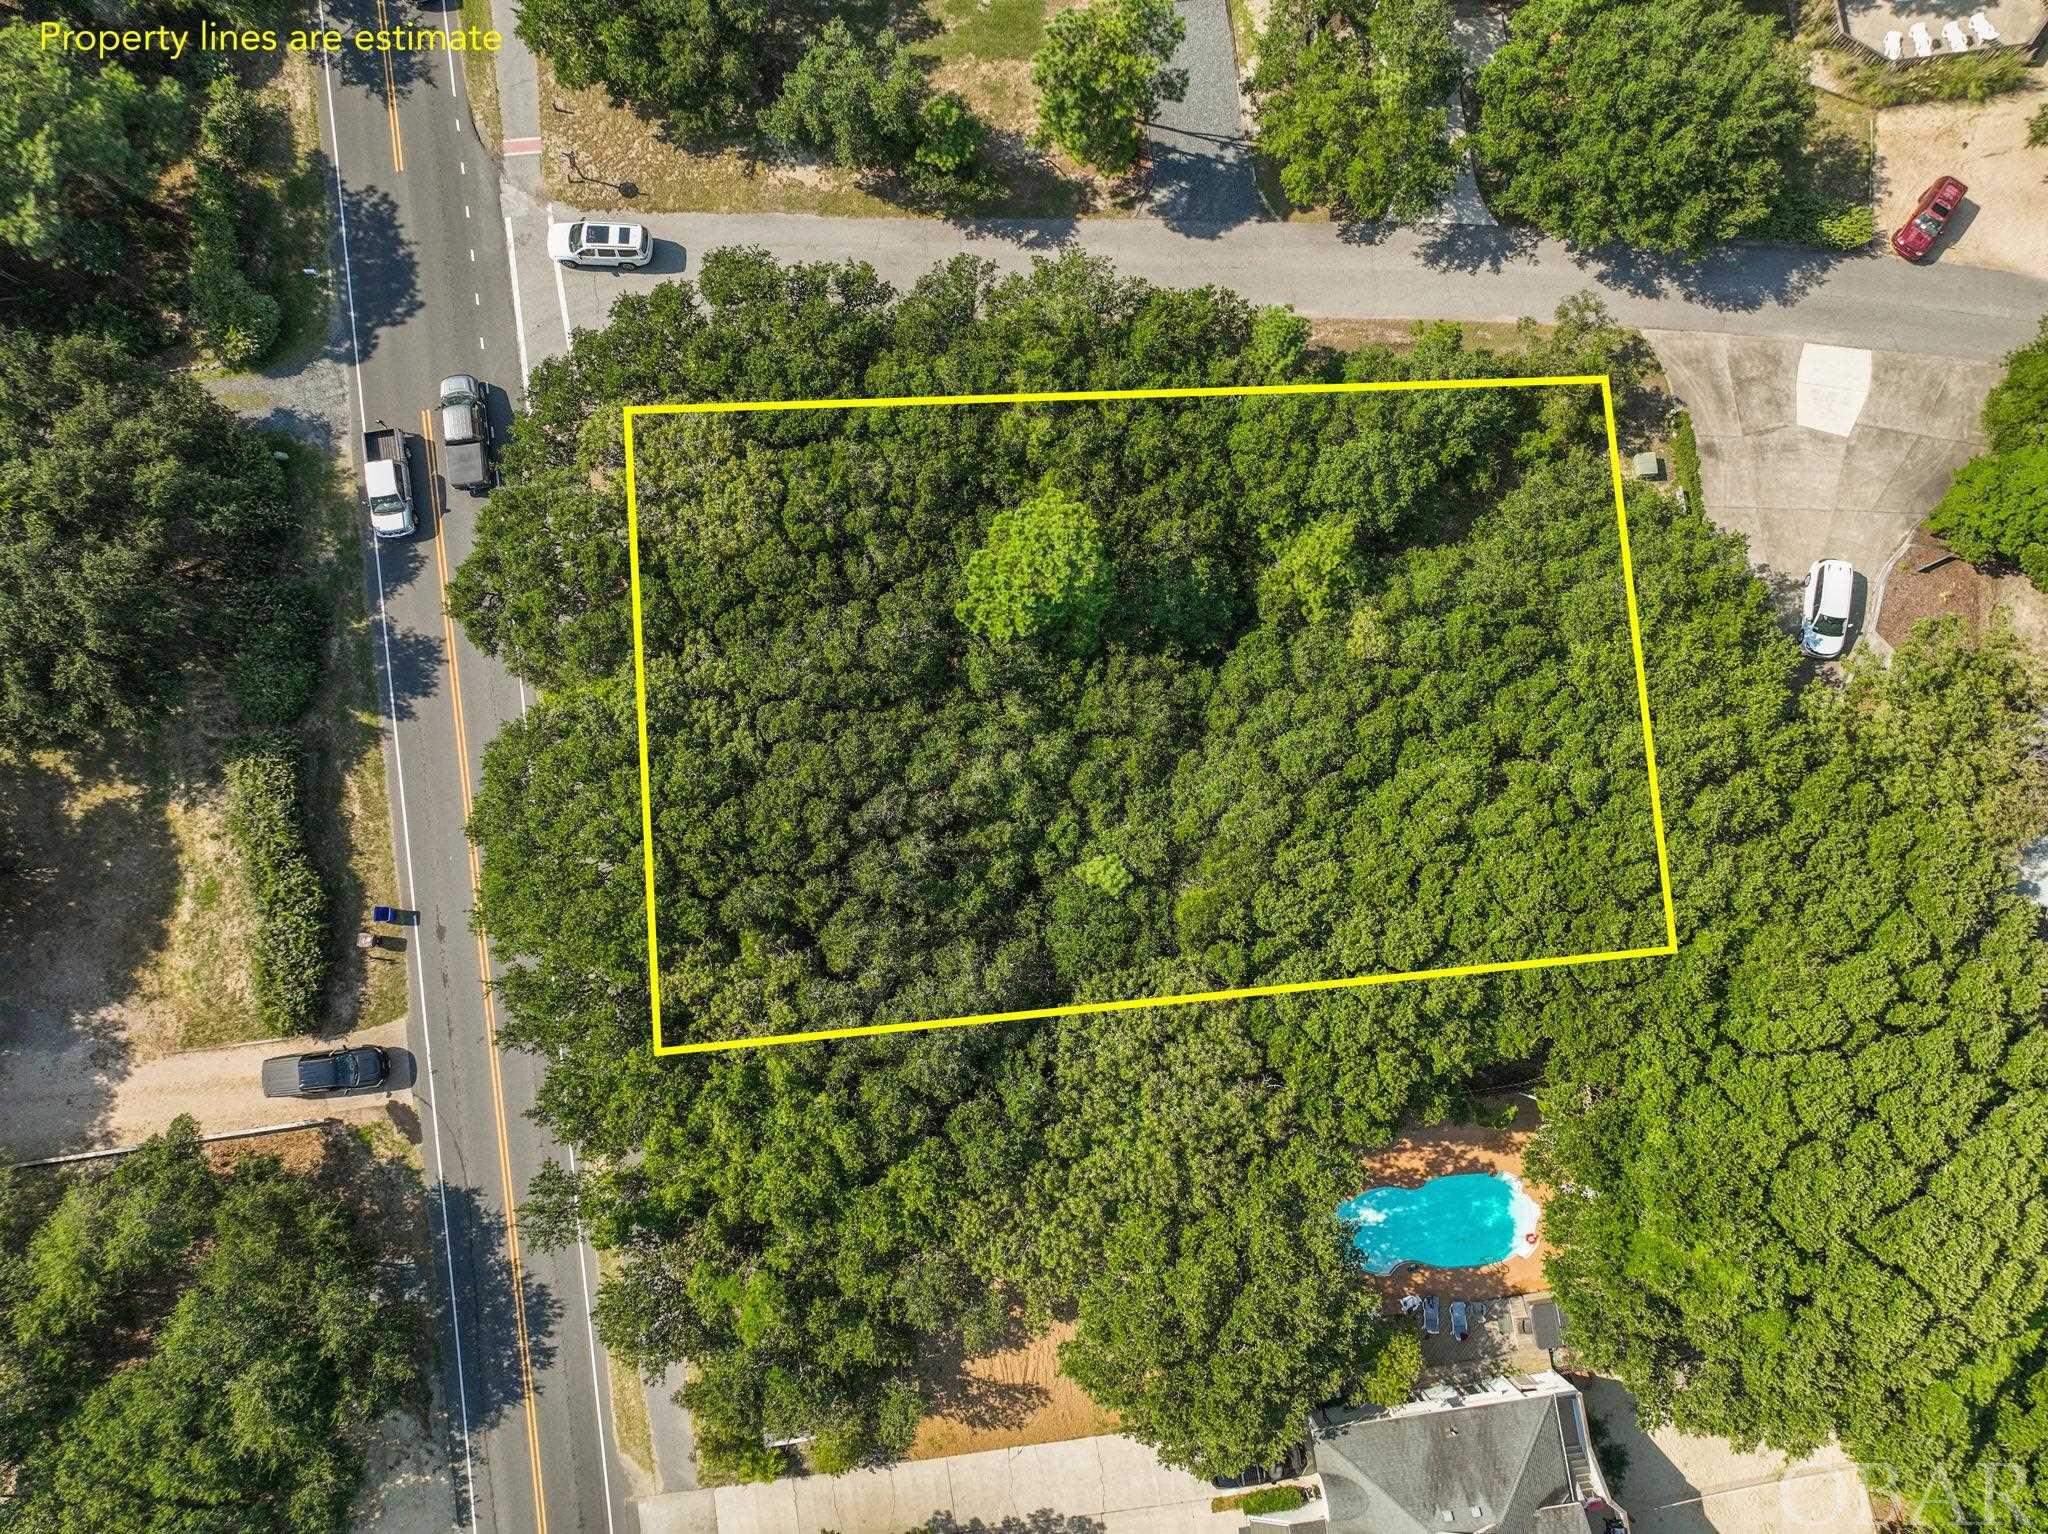 This wooded lot in Southern Shores offers a prime location with a quick and convenient walk to the nearby beach access point situated at the end of the block, accessible straight down 7th Avenue. Additionally, its strategic placement places it just two blocks away from the Hickory Street traffic light, making it easy to connect to Duck Road, a key route in the area. This parcel is ideal for realizing your vision of a custom dream home or a vacation rental property. Being situated in an X flood zone, you'll benefit from not having to pay for flood insurance costs, making it a financially appealing choice. Whether you're looking to create your personal haven or an income-generating rental, this lot's characteristics make it well-suited for either endeavor.  Ocean views are possible. For those looking to enhance their coastal lifestyle, an optional membership to the Southern Shores Civic Association (SSCA) is available. This membership offers various privileges such as access to a marina, a serene sound-side beach area, parks, and additional amenities. This adds an extra layer of appeal and value to the property, providing opportunities for recreation and relaxation. Given its scarcity, this lot is a rare gem within the sought-after Southern Shores community. With its strategic location, proximity to the beach, and potential for constructing your dream home or investment property, it presents a unique opportunity for those seeking a slice of coastal paradise within this highly desirable neighborhood.